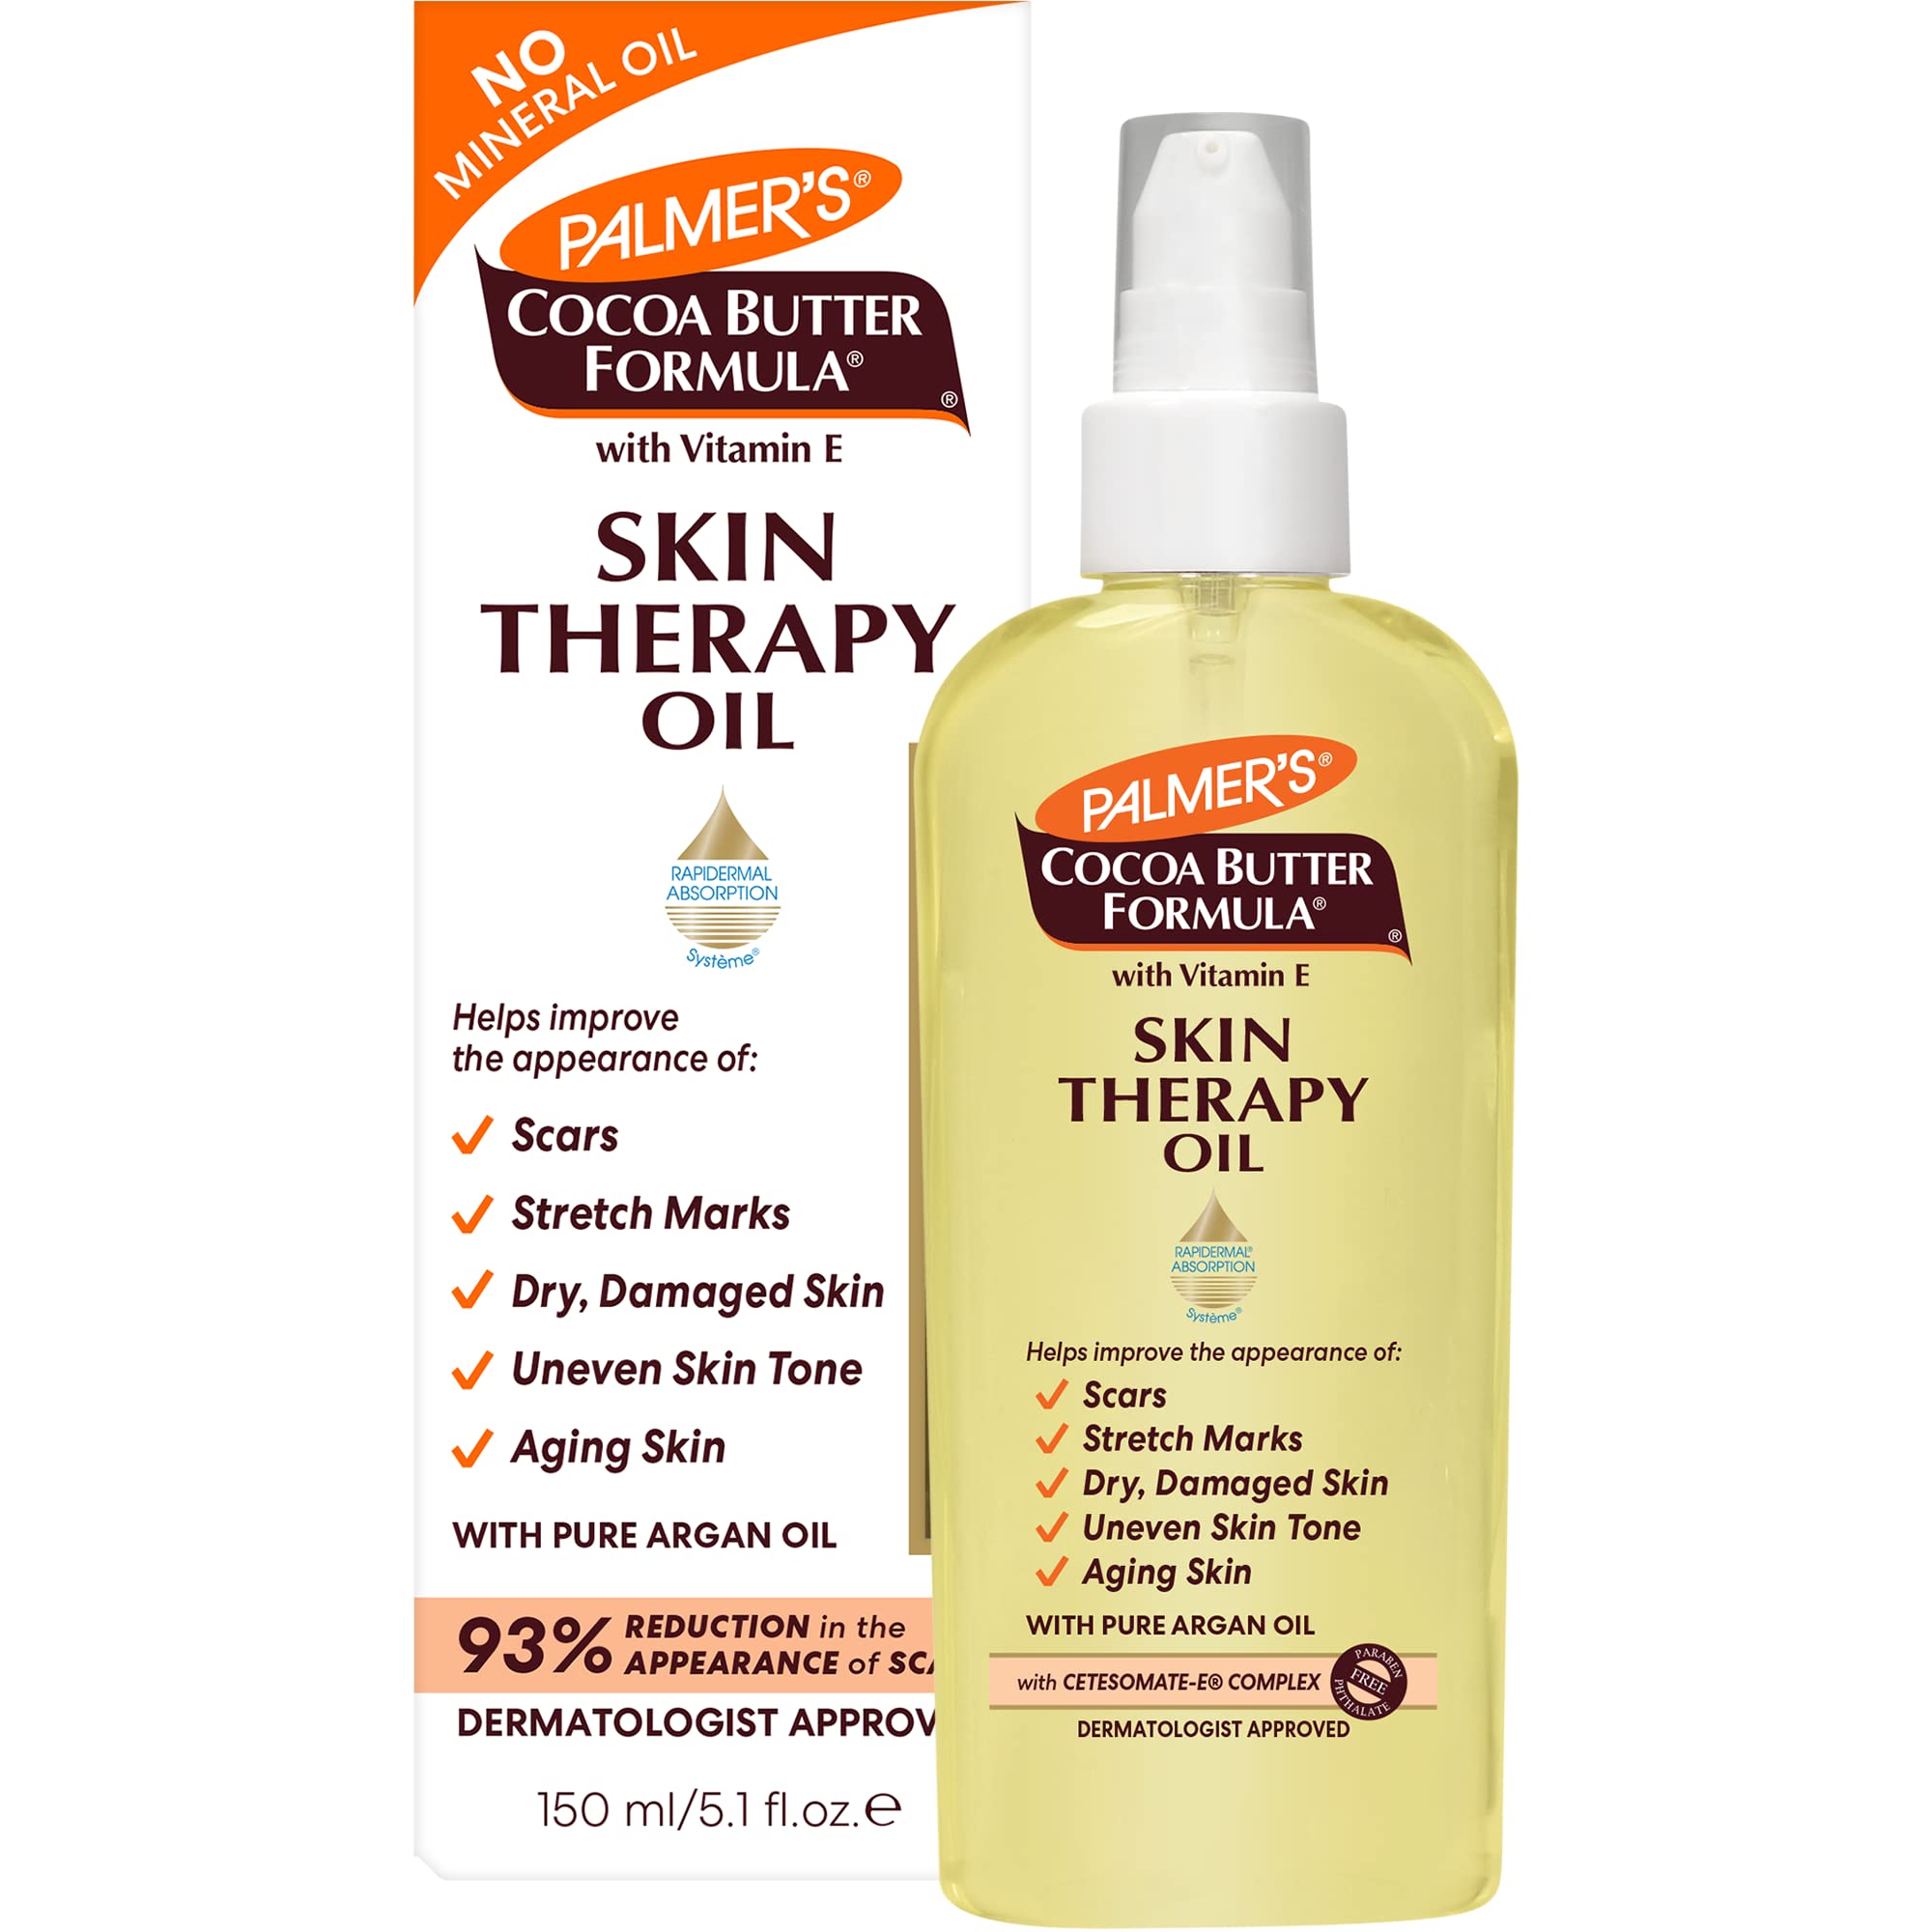 Palmer's Cocoa Butter Formula Skin Therapy Moisturizing Body Oil for Scars & Stretch Marks, 5.1 Ounces & Cocoa Butter Formula with Vitamin E + Q10 Firming Butter Body Lotion,10.6 Fl Oz